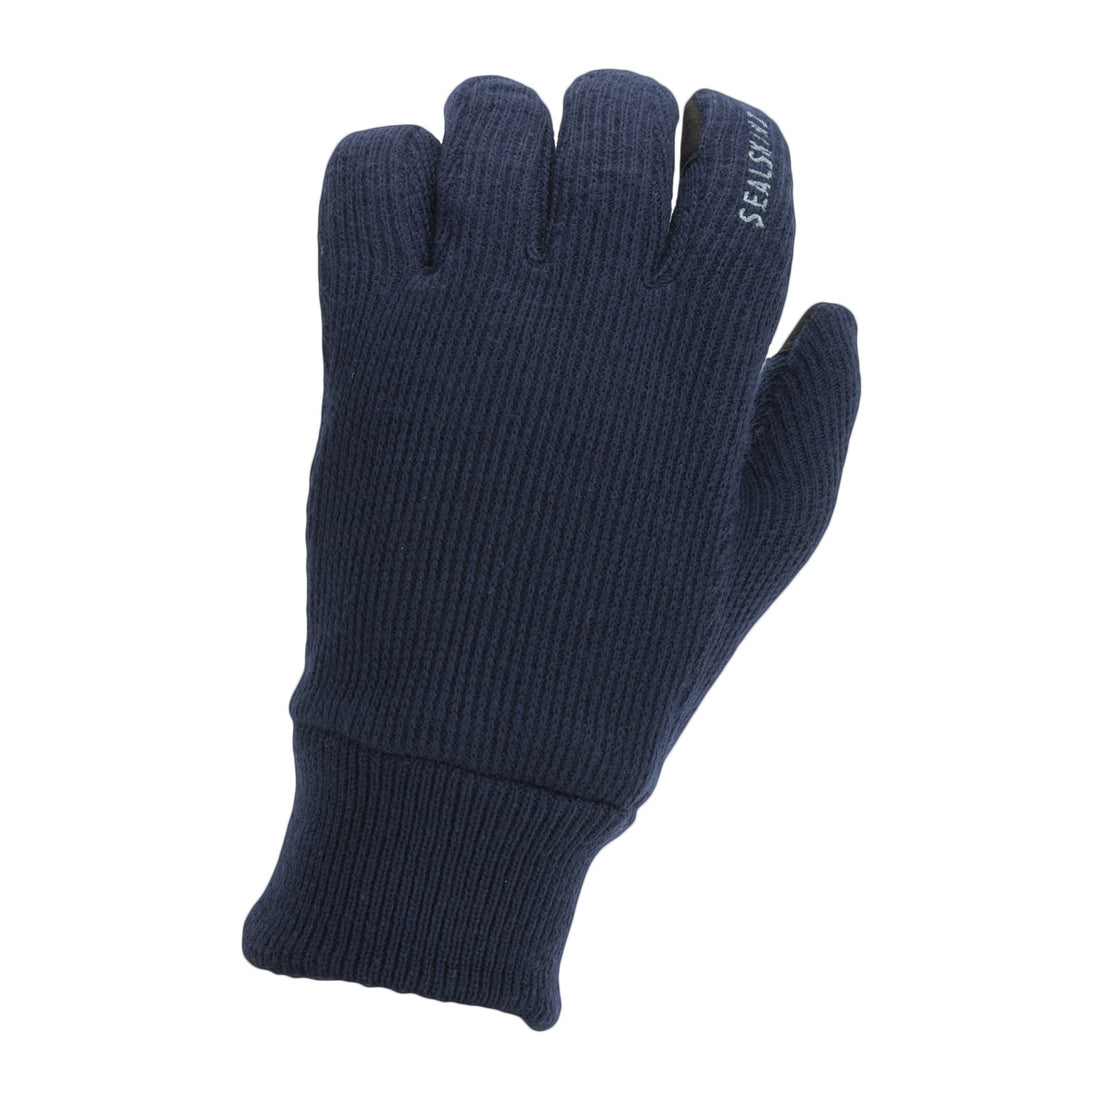 SealSkinz-Windproof-All-Weather-Knitted-Gloves